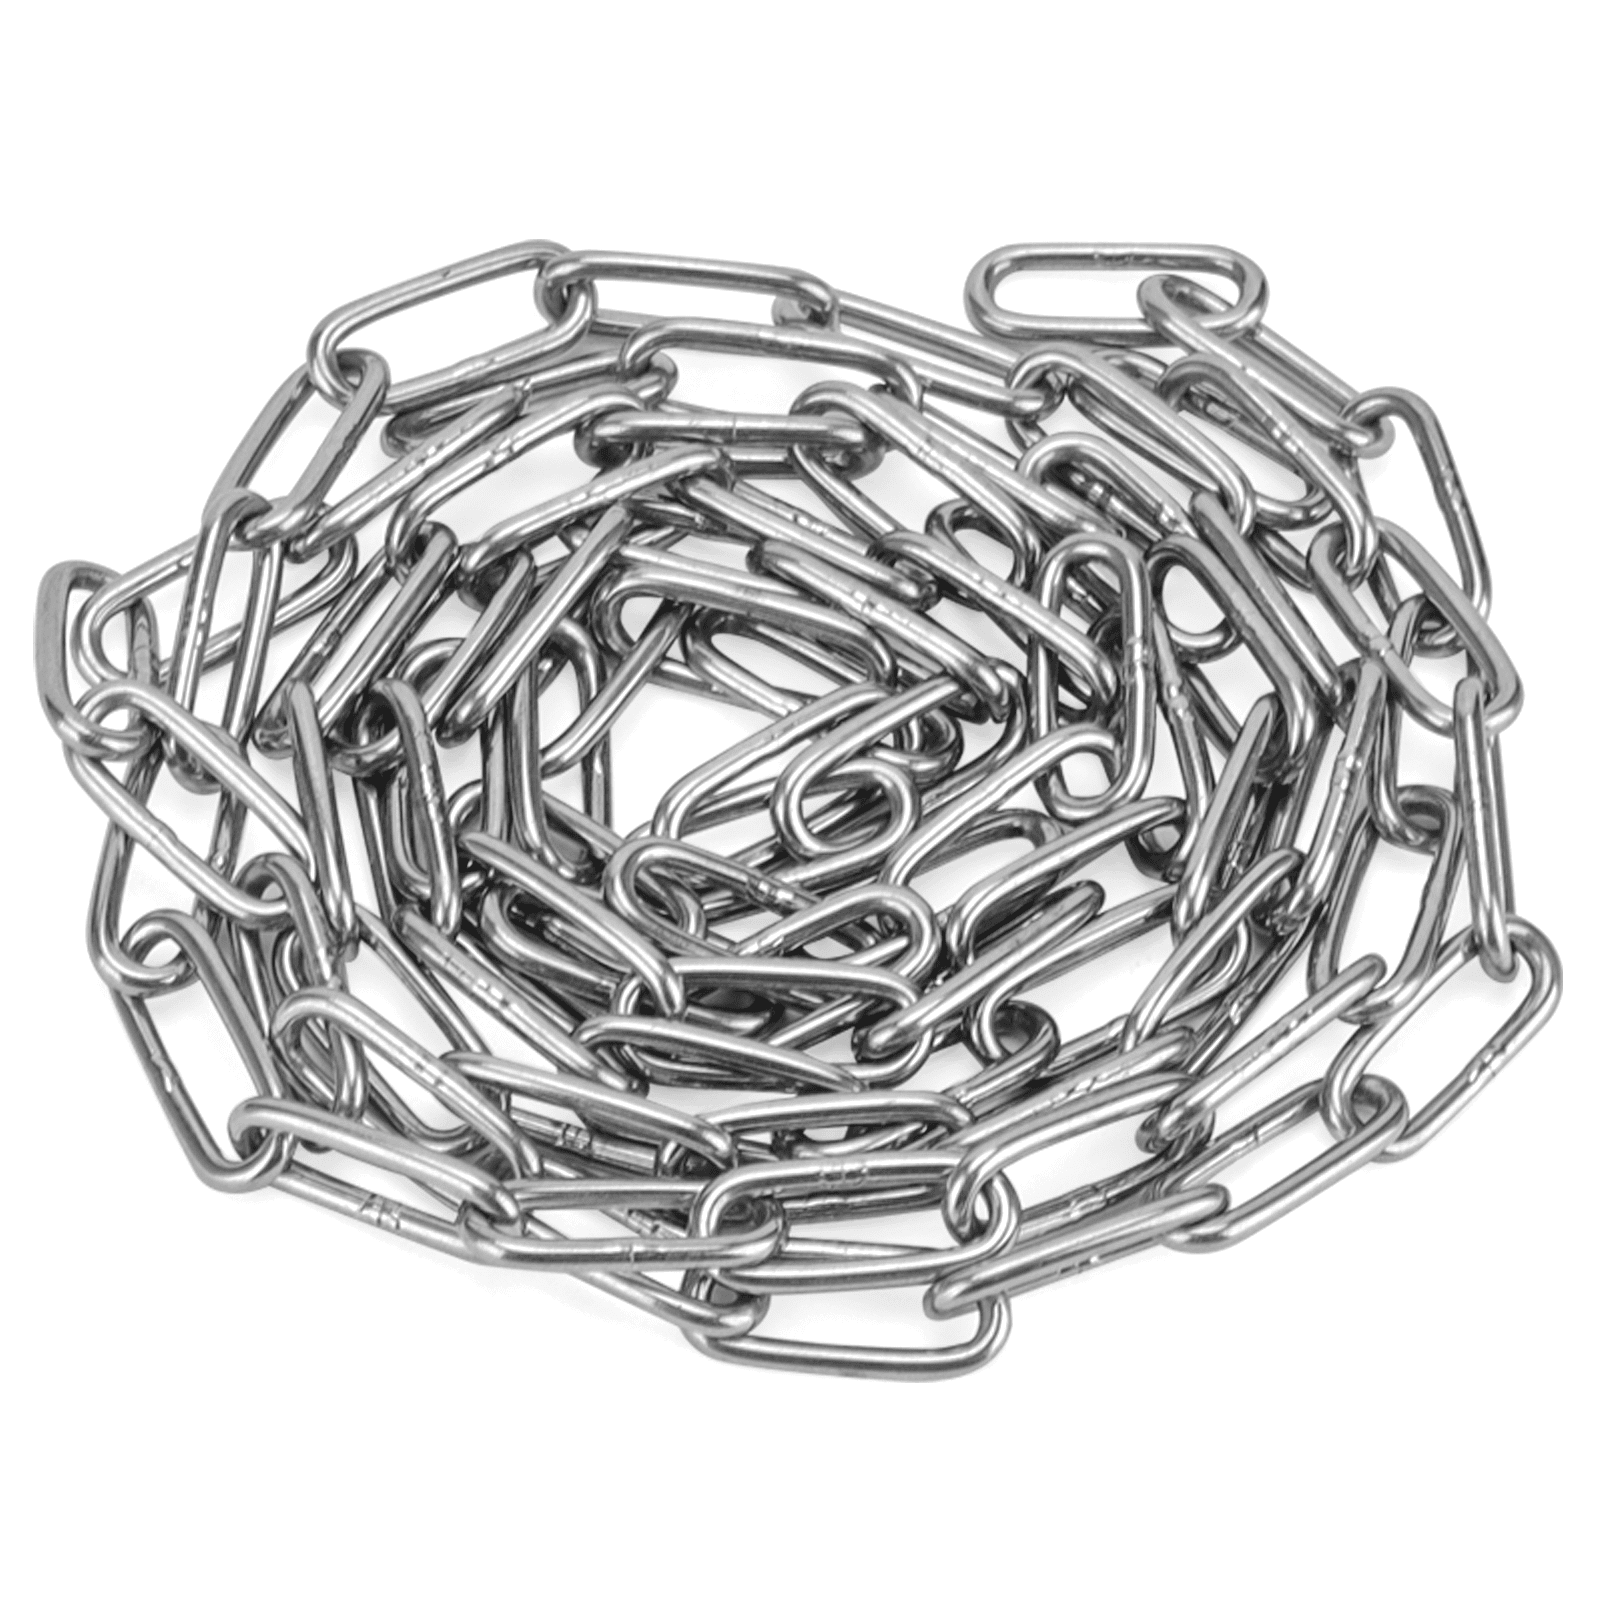 Stainless Steel 316 Chain 3mm or 1/8 Medium Link Chain by the foot